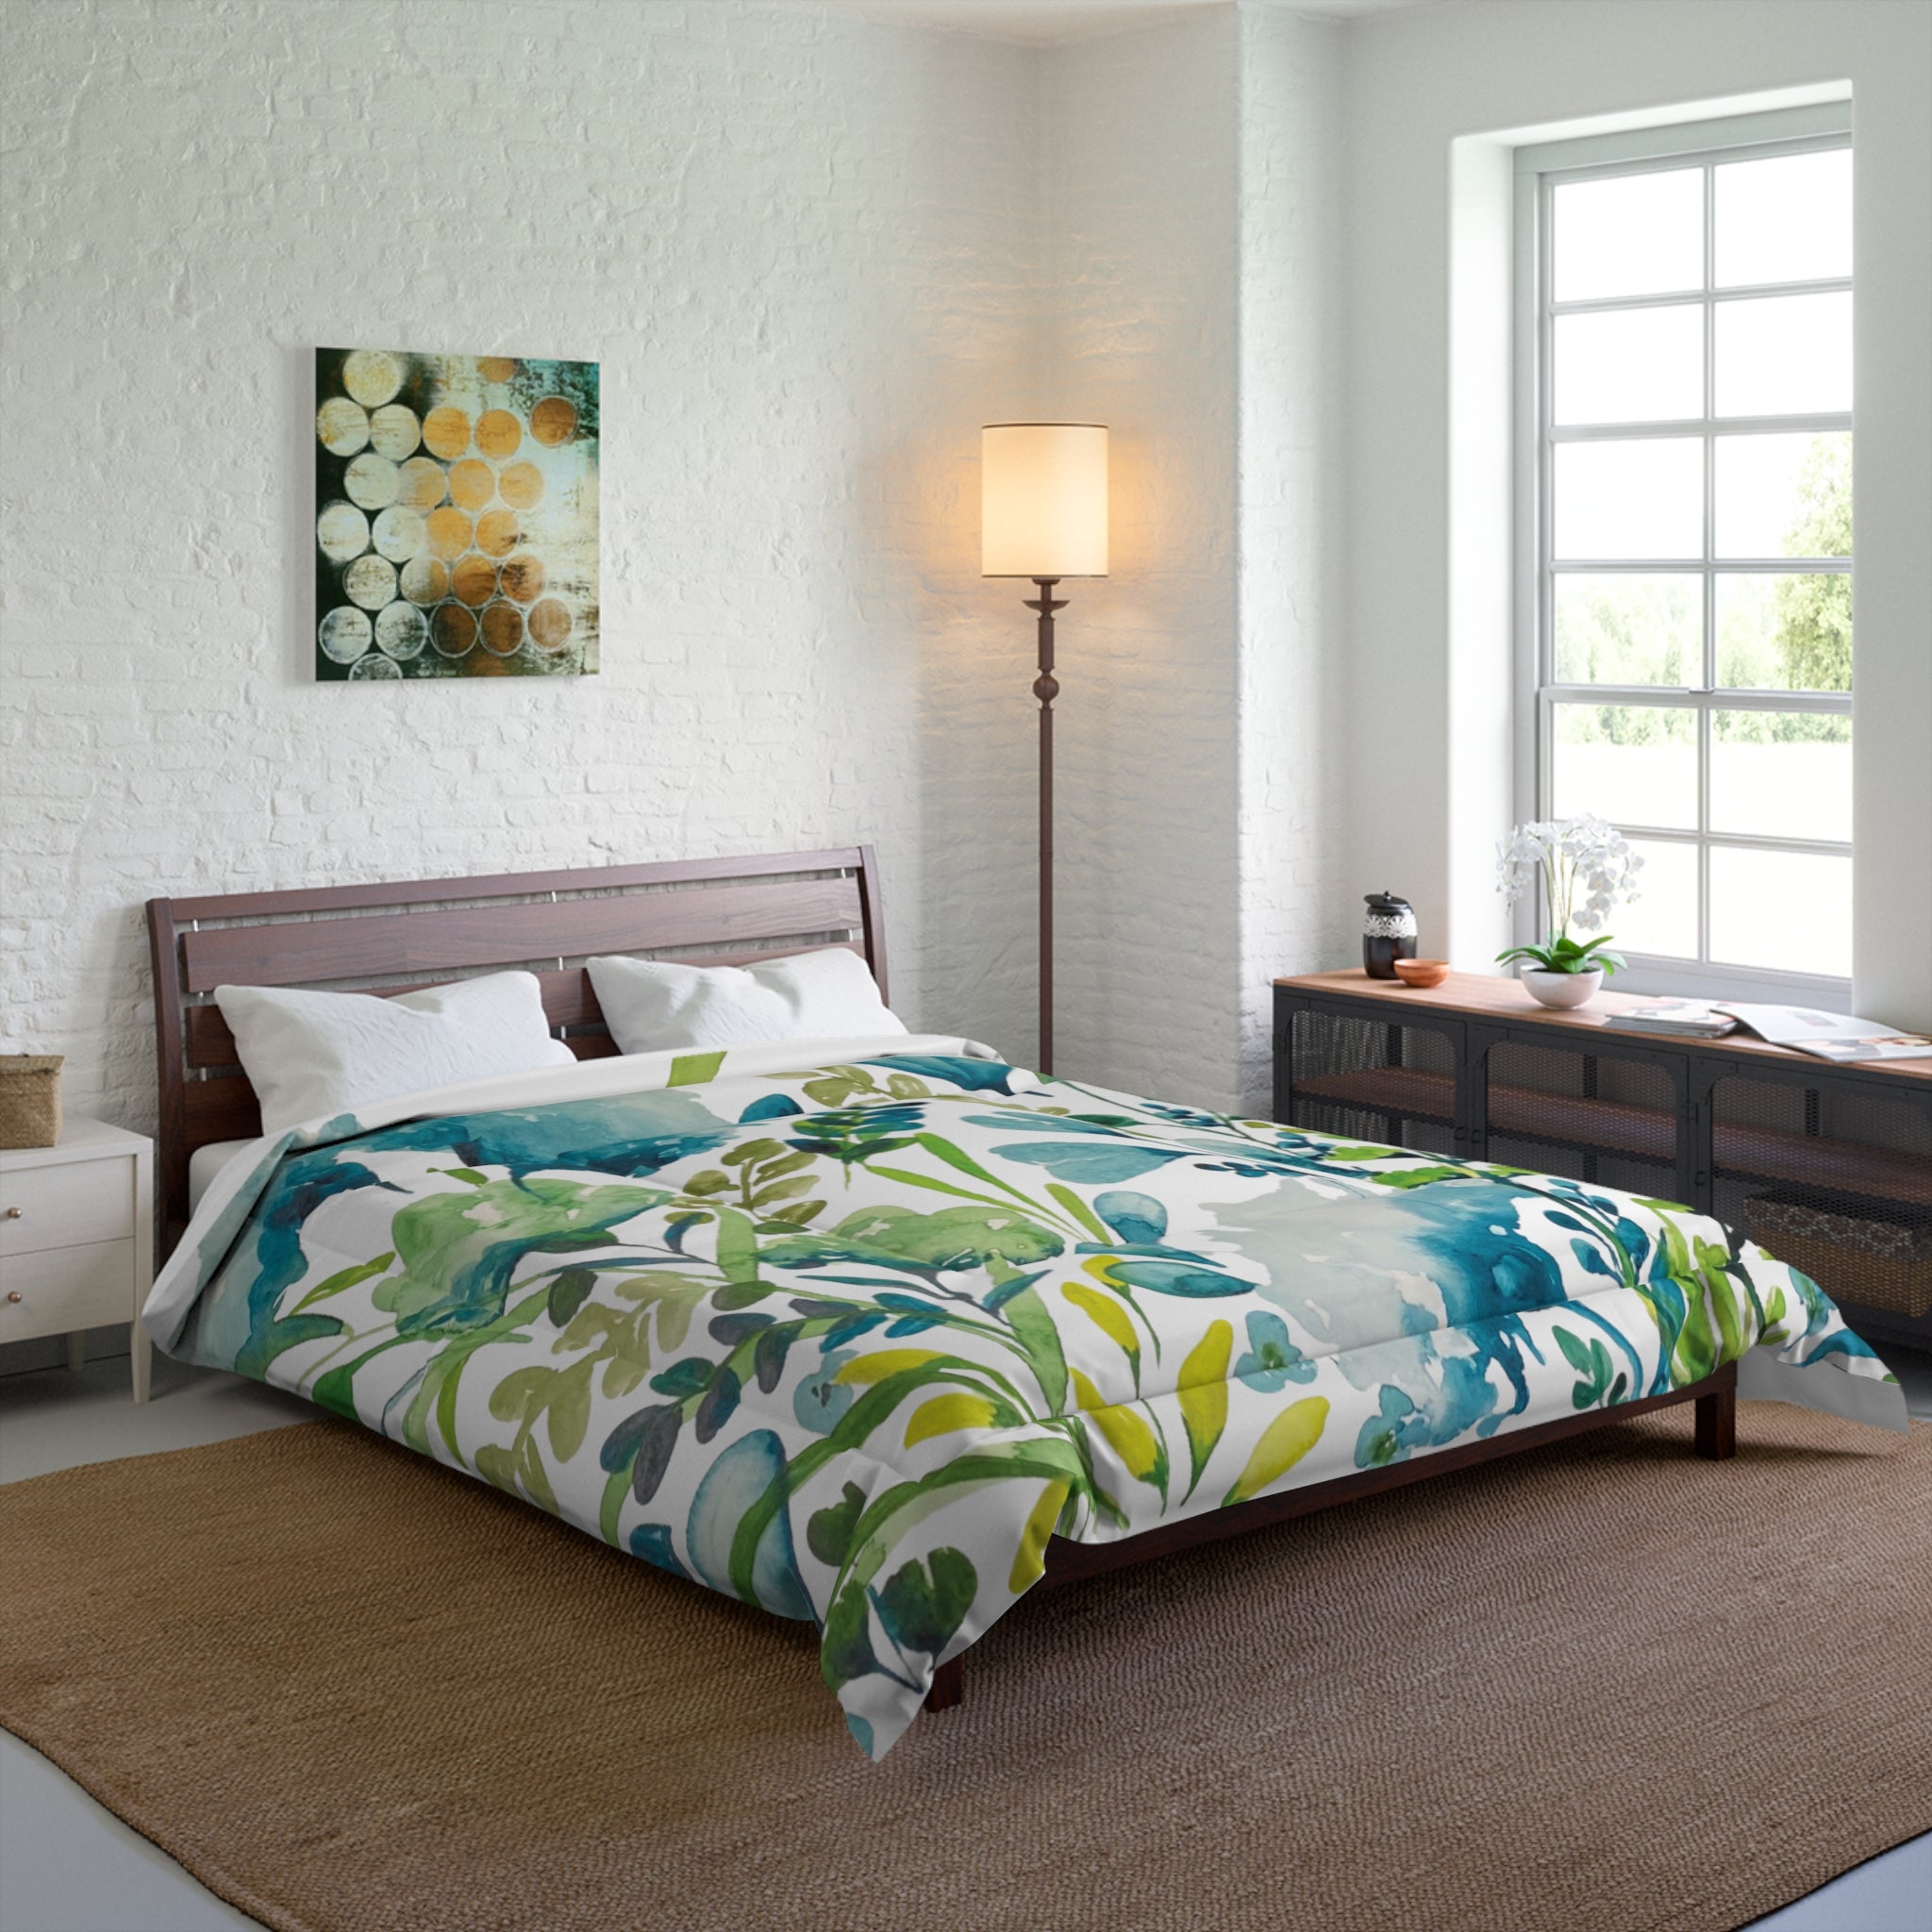 Emerald Green & Turquoise Floral Print on Comforter